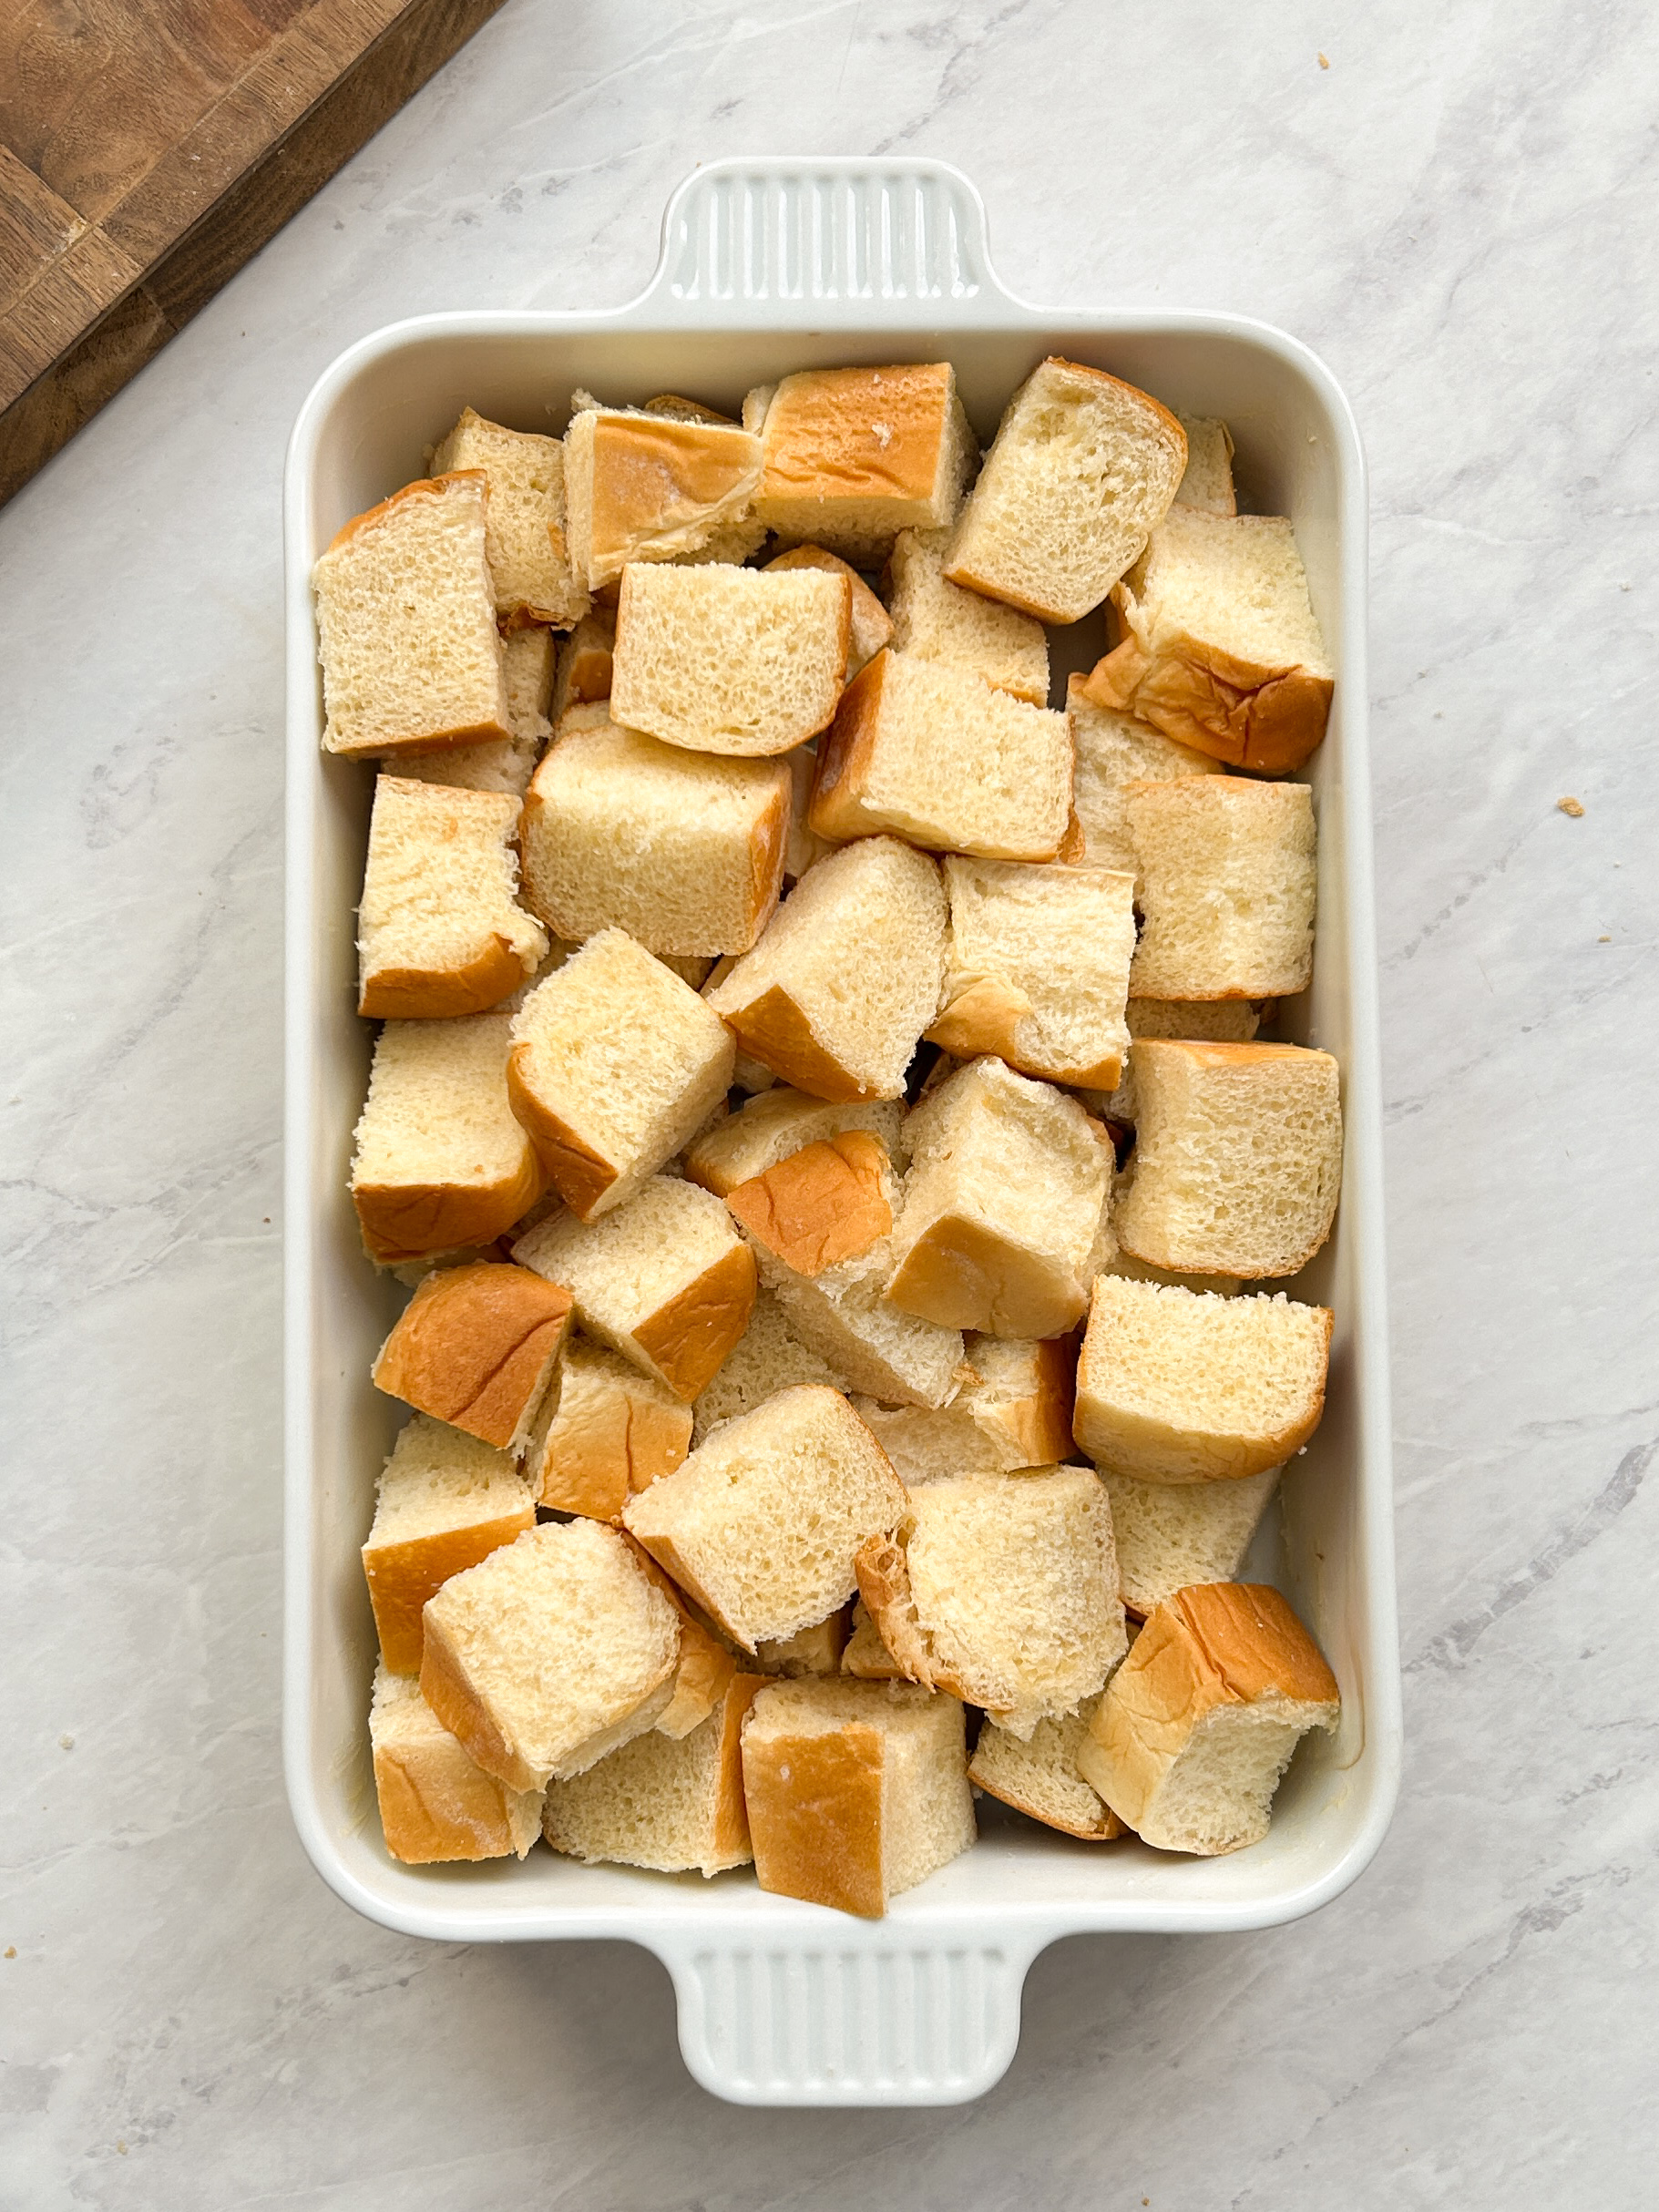 large cubes of bread in a white rectangular baking dish arranged haphazardly